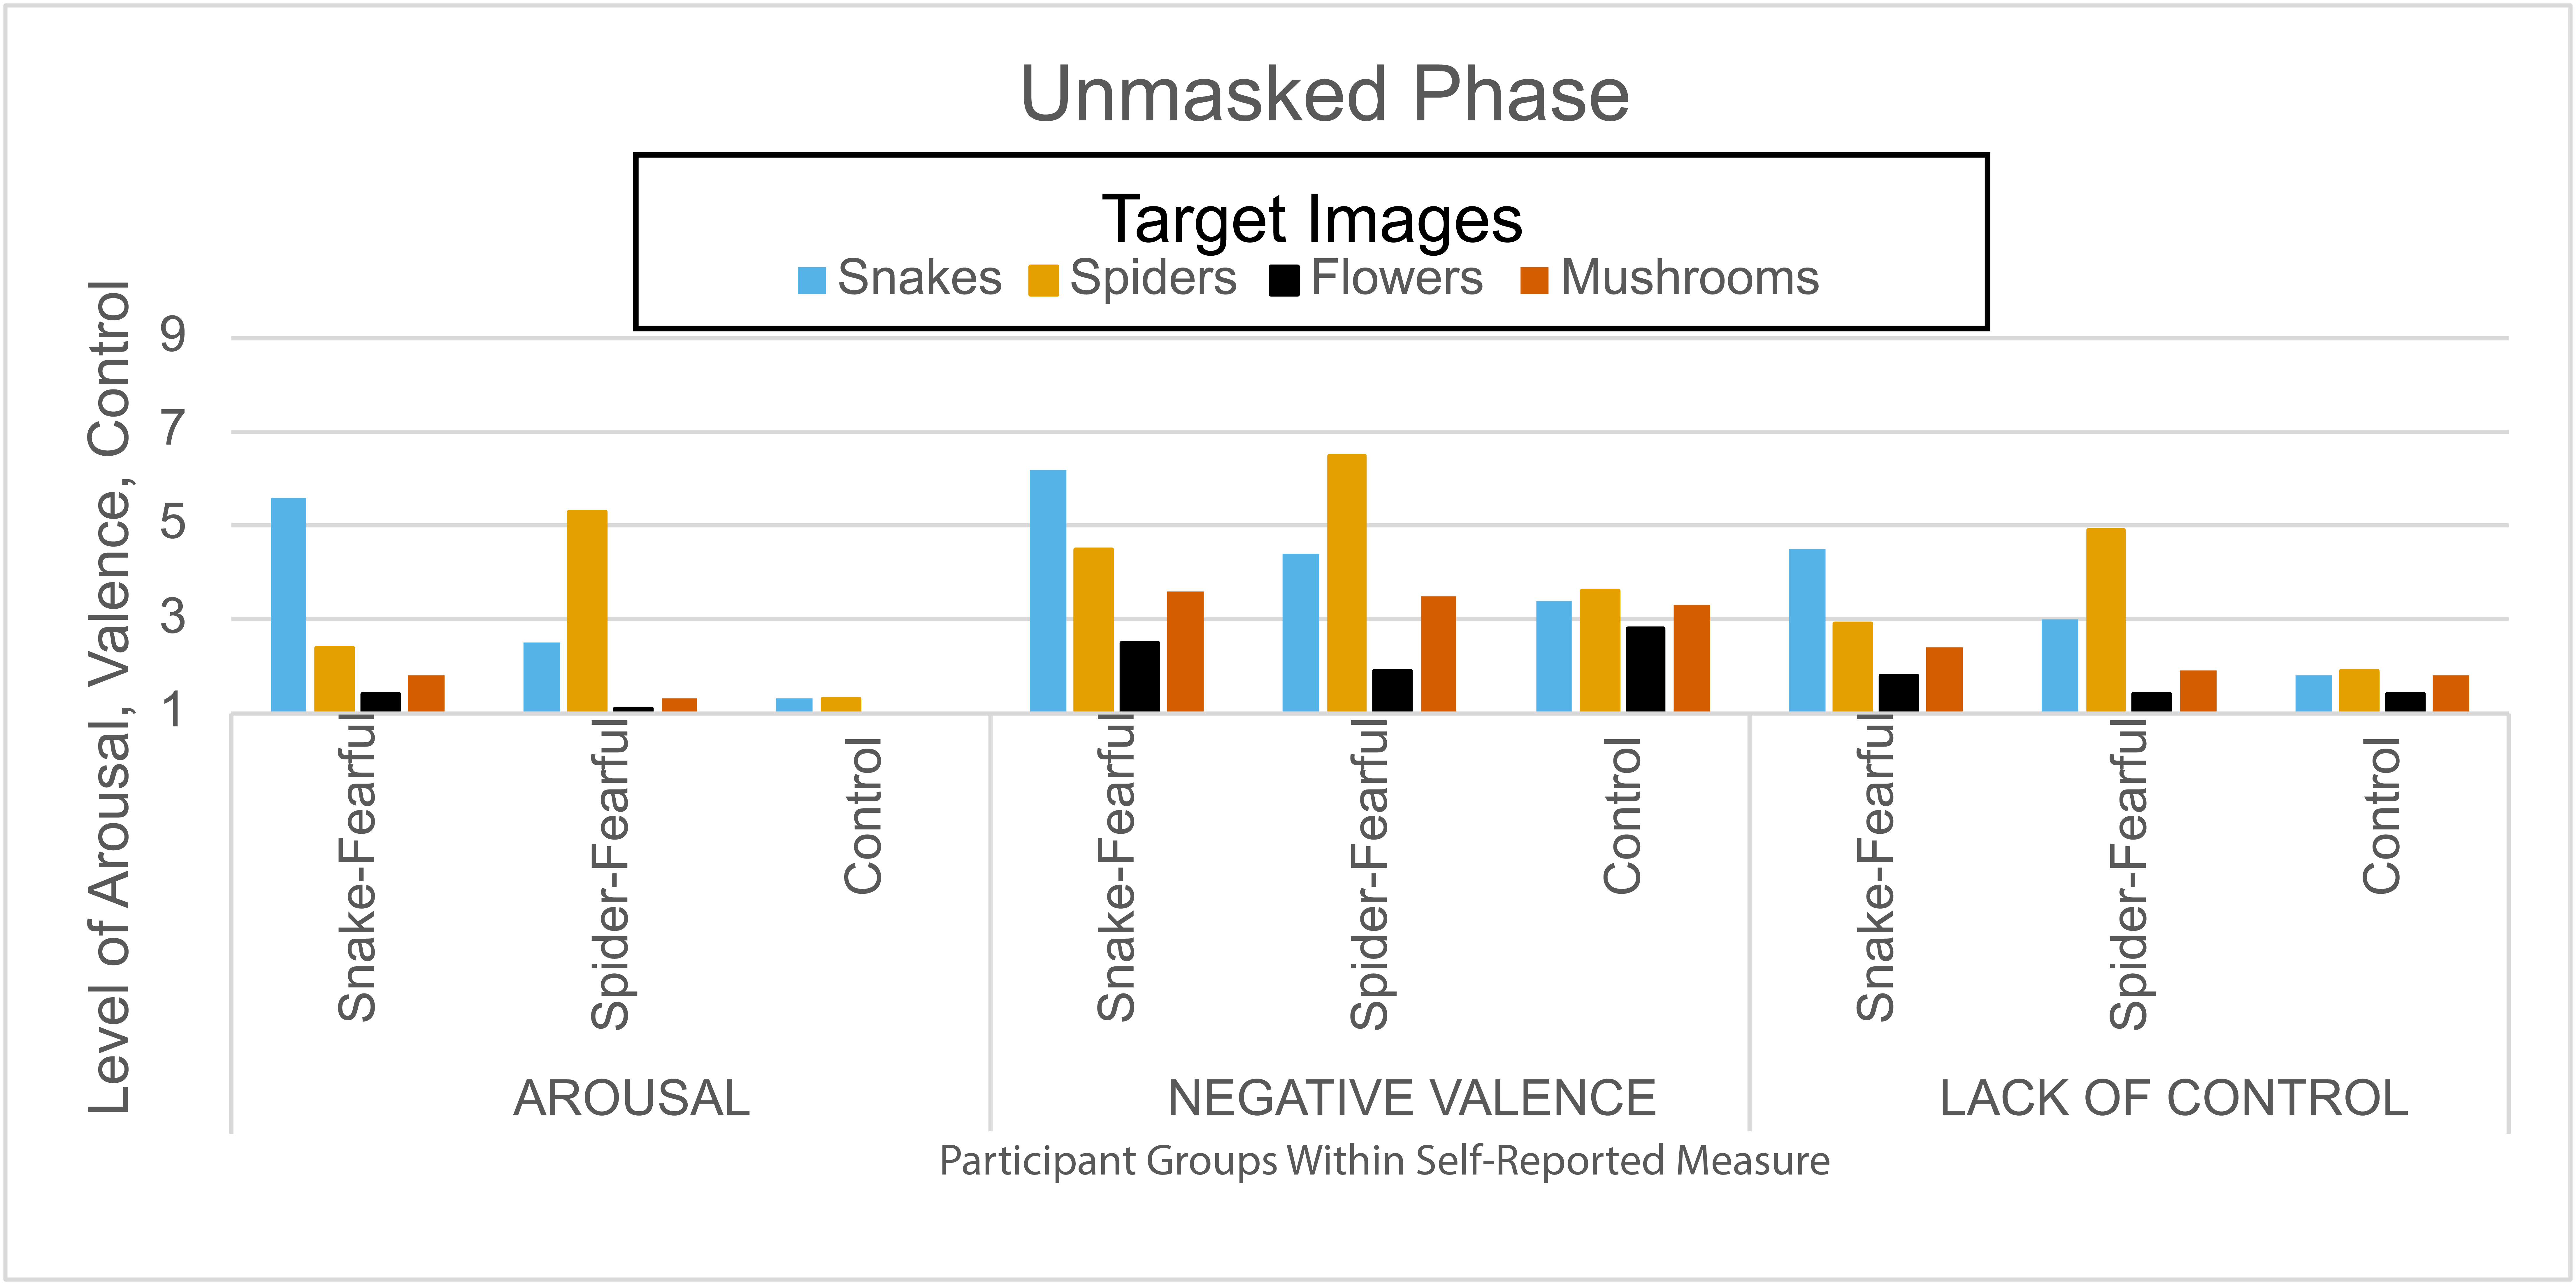 One graph for unmasked phase. The graph has 3 sections of 12 bars (36 bars total). Within each section are 3 groups, each group has 4 bars. The 4 bars in each group are the same: Snakes (blue), Spiders (gold), Flowers (black), Mushrooms (orange). The three groups in the sections are all consistent: Snake-fearful, spider-fearful, and control. The three sections are Arousal (left), Negative Valence (middle), Lack of control (right).